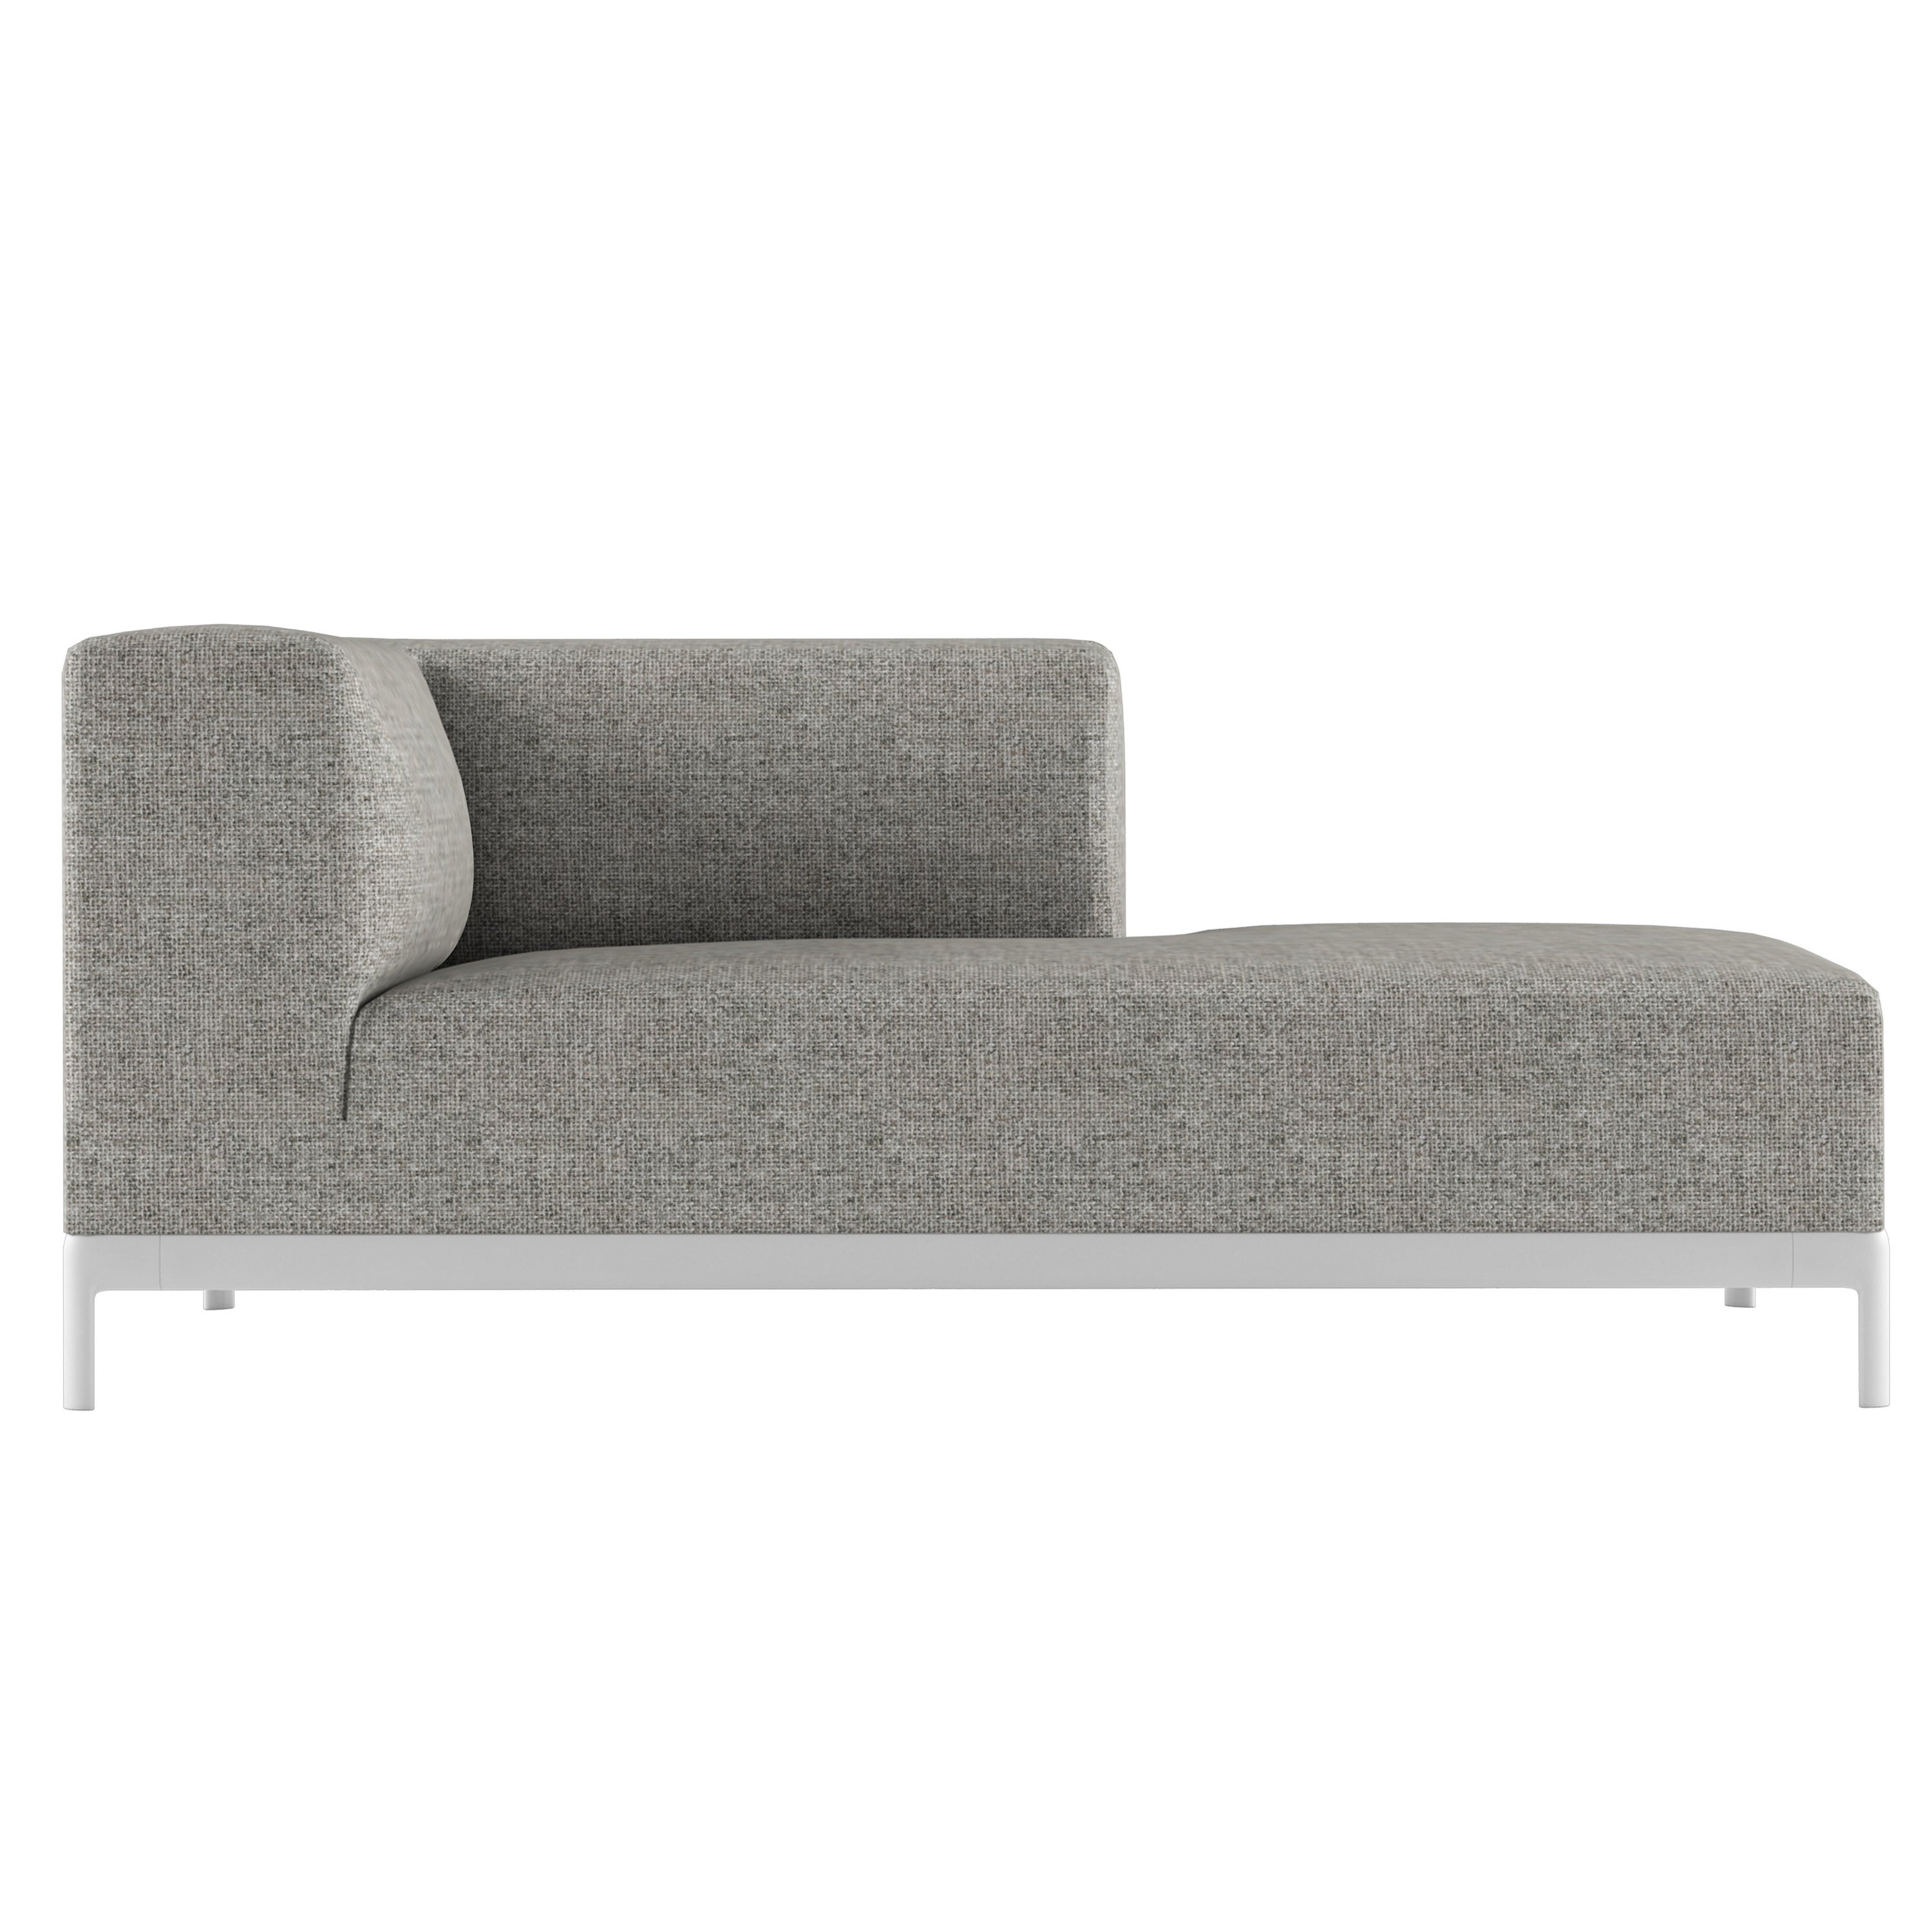 Alias P65 AluZen Outdoor DX Soft Ending Sofa in Upholstery with Aluminium Frame For Sale